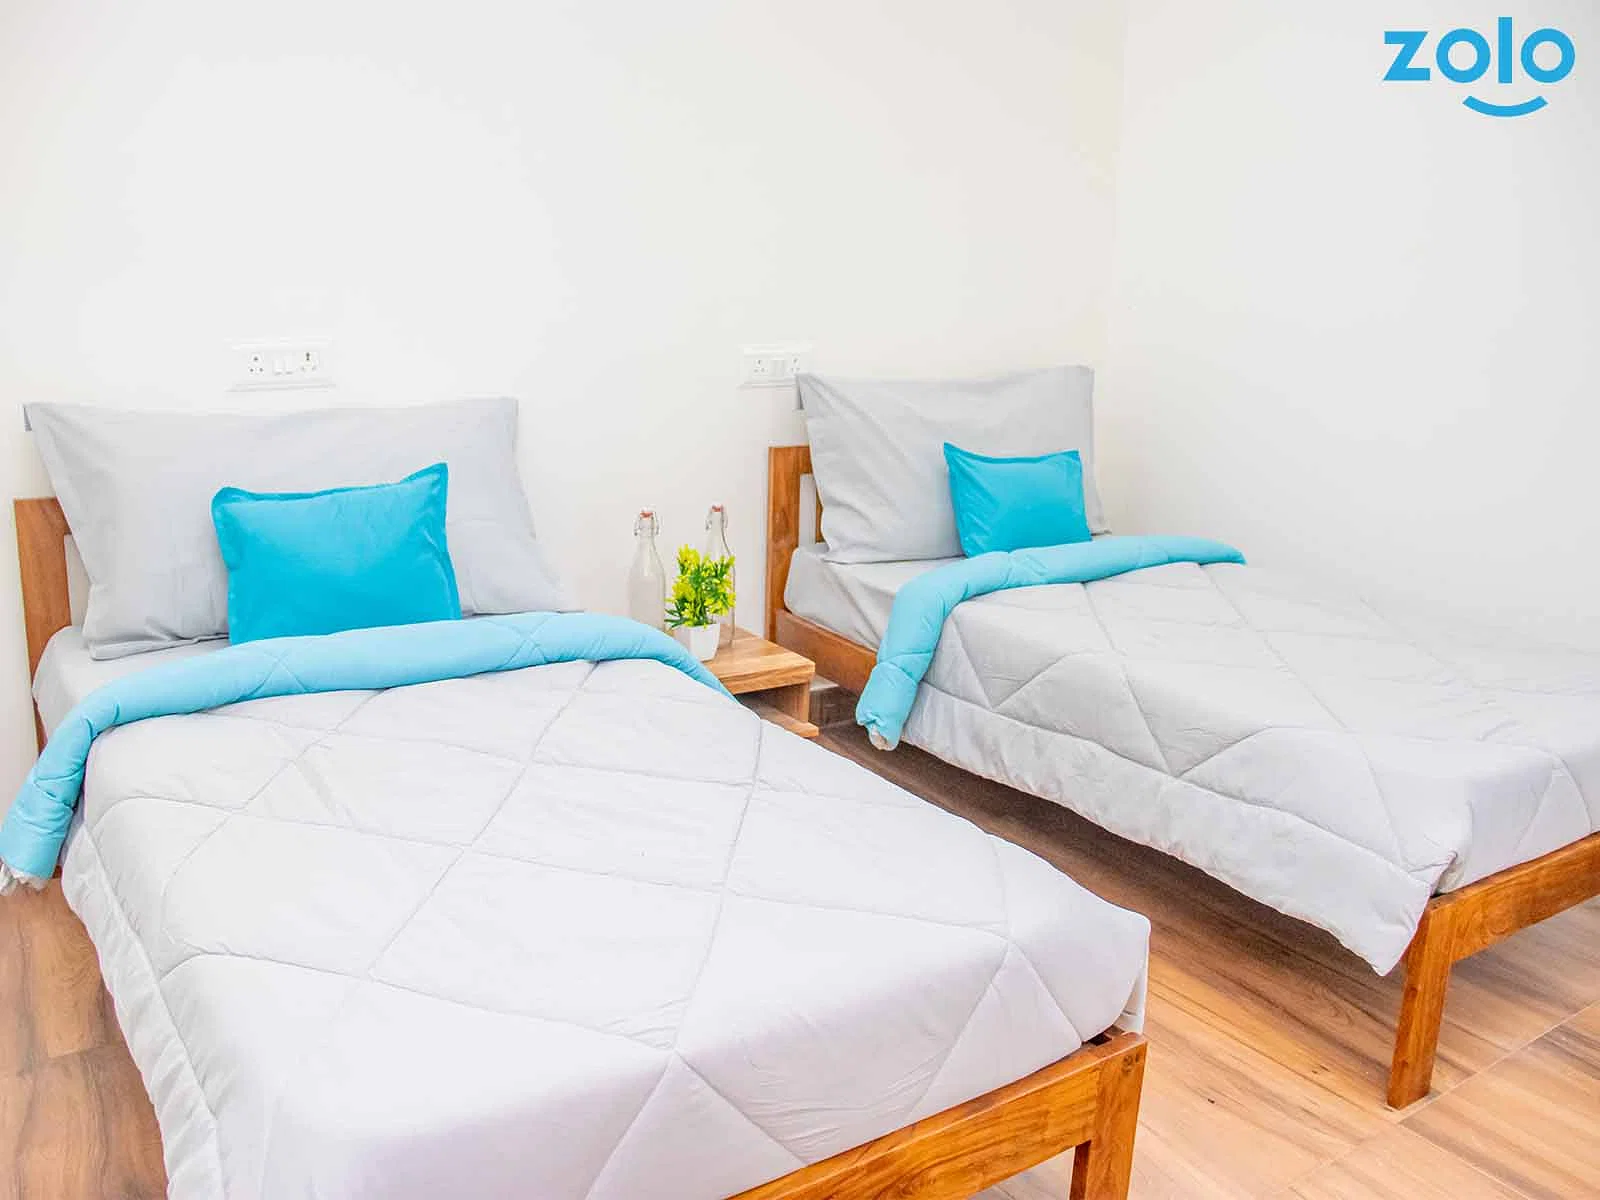 Fully furnished single/sharing rooms for rent in HSR Layout with no brokerage-apply fast-Zolo Akshala